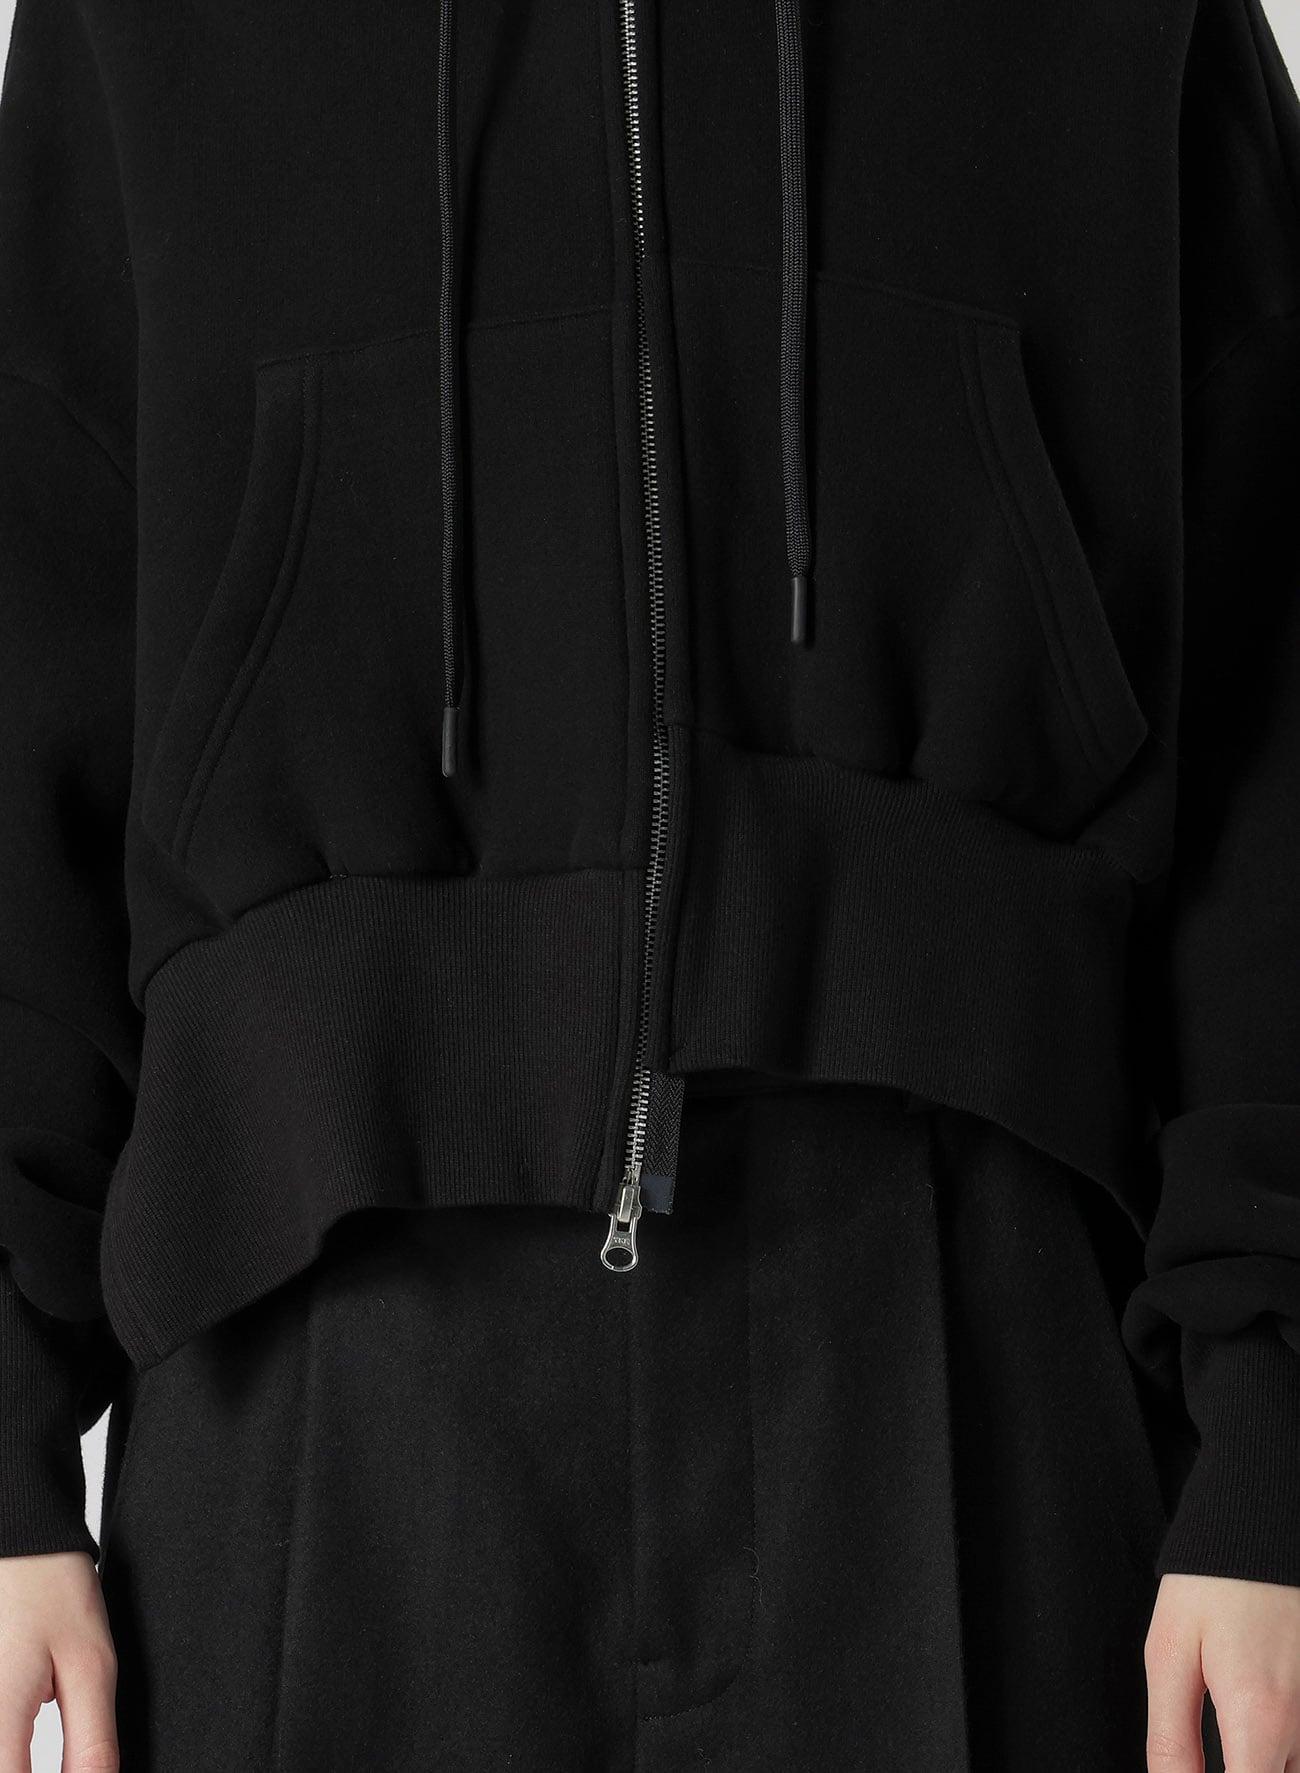 Liy/C BLUSHED FRENCH TERRY R-UNBALANCE HOODIE